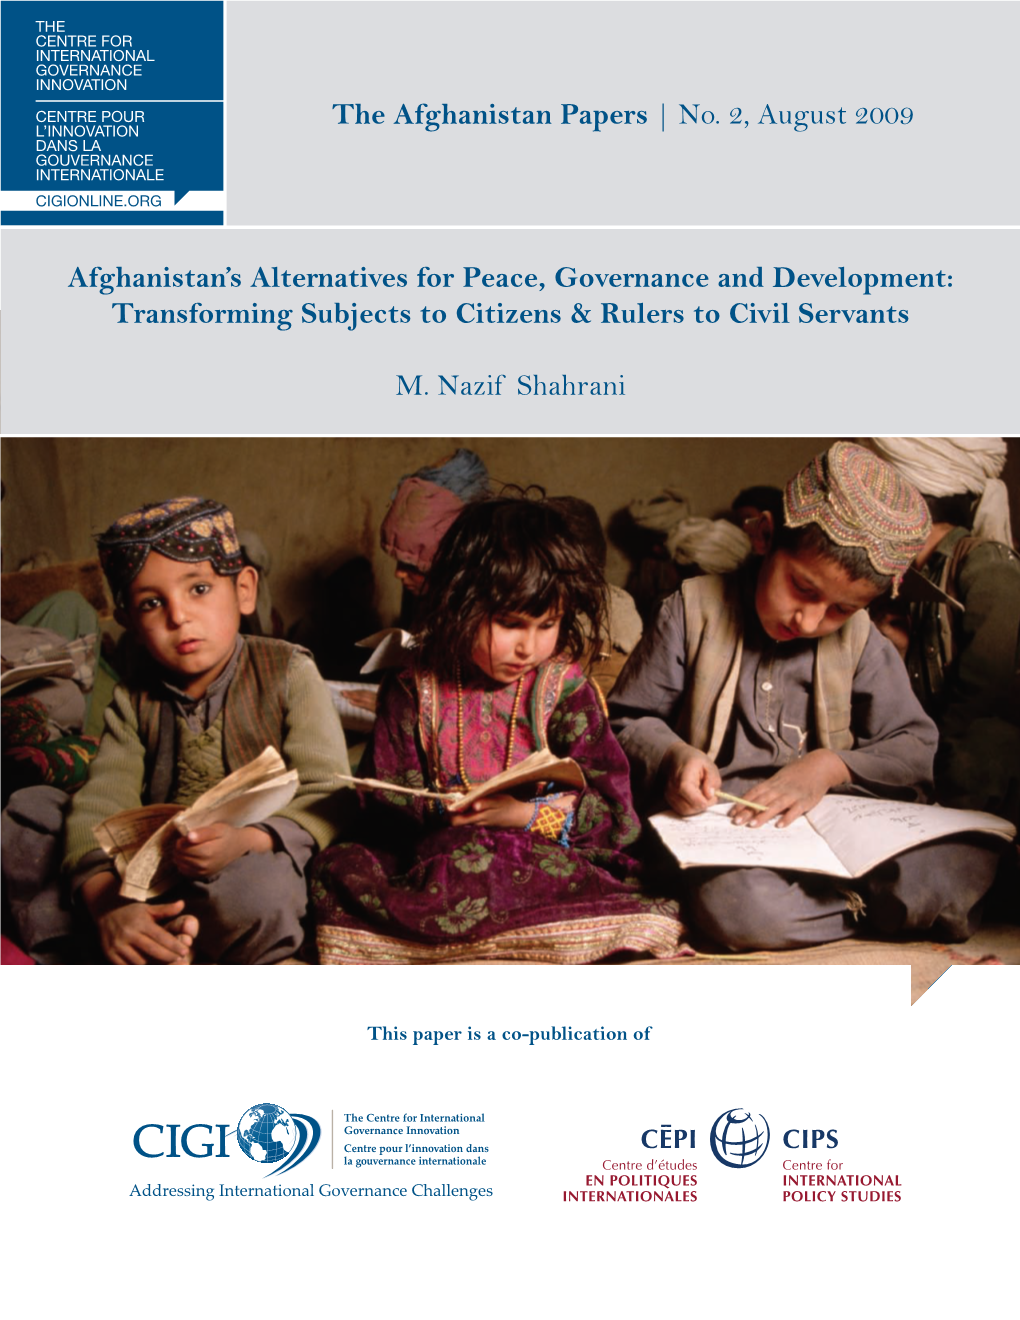 Afghanistan's Alternatives for Peace, Governance and Development